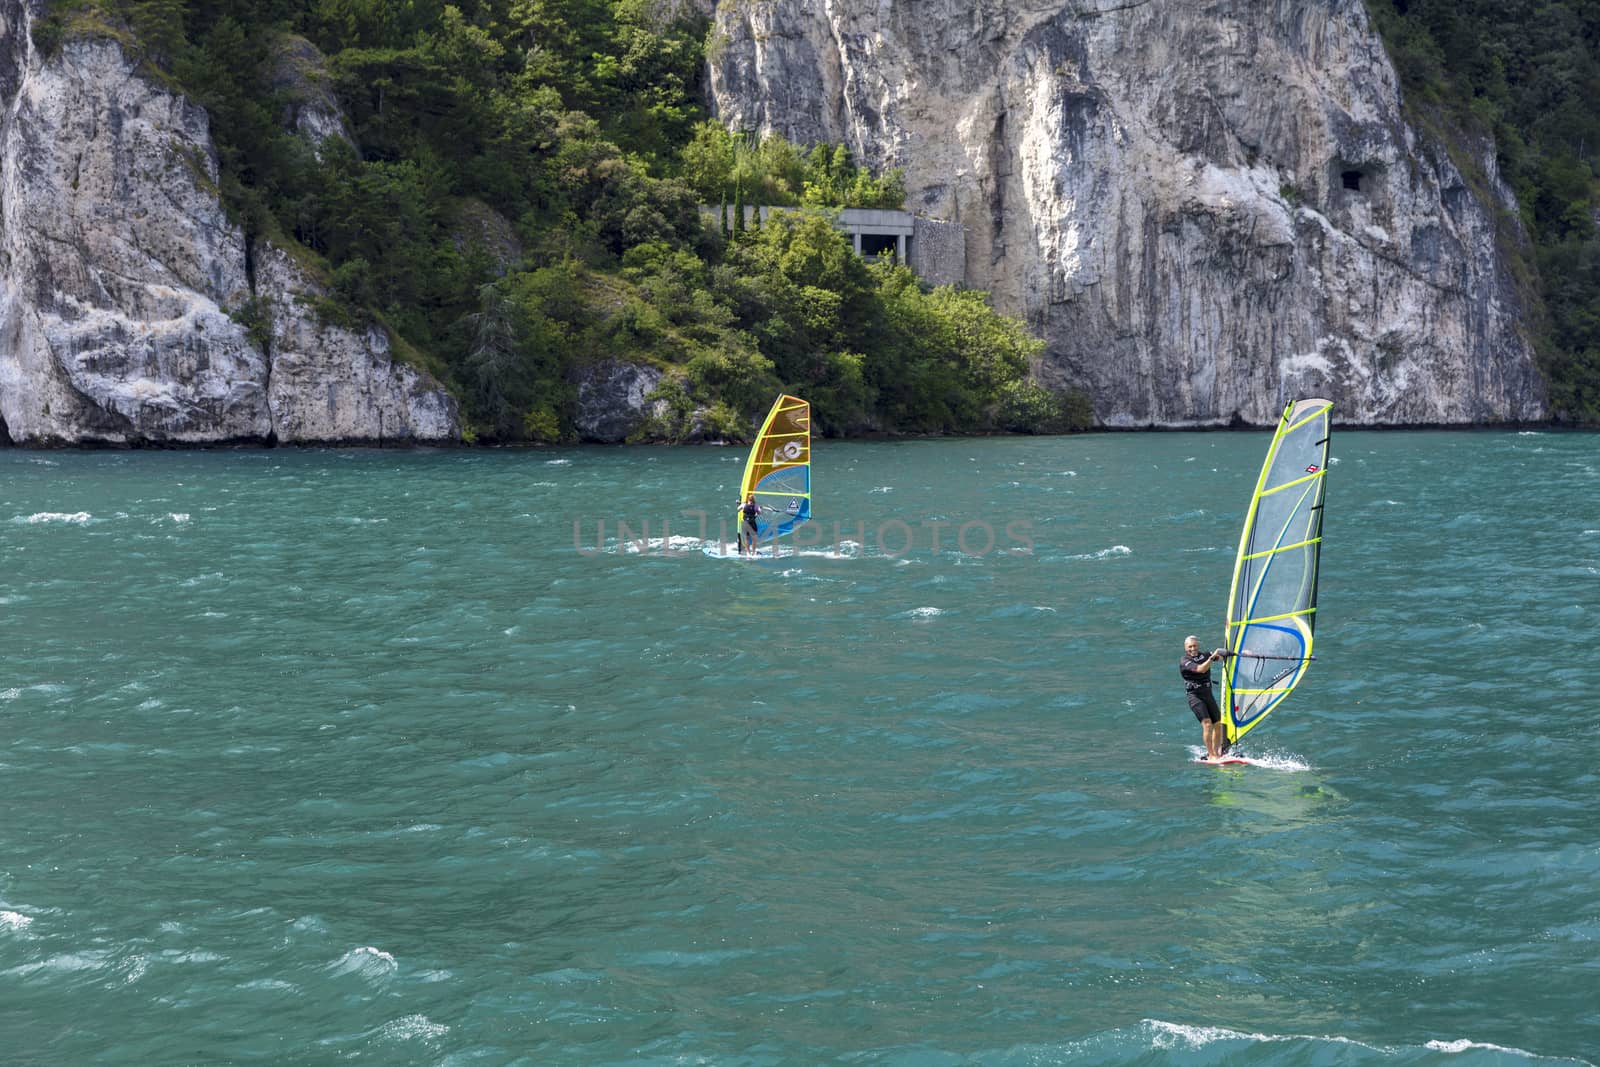 Lake Garda, Italy, August 2019, windsurfing on the lake by ElectricEggPhoto